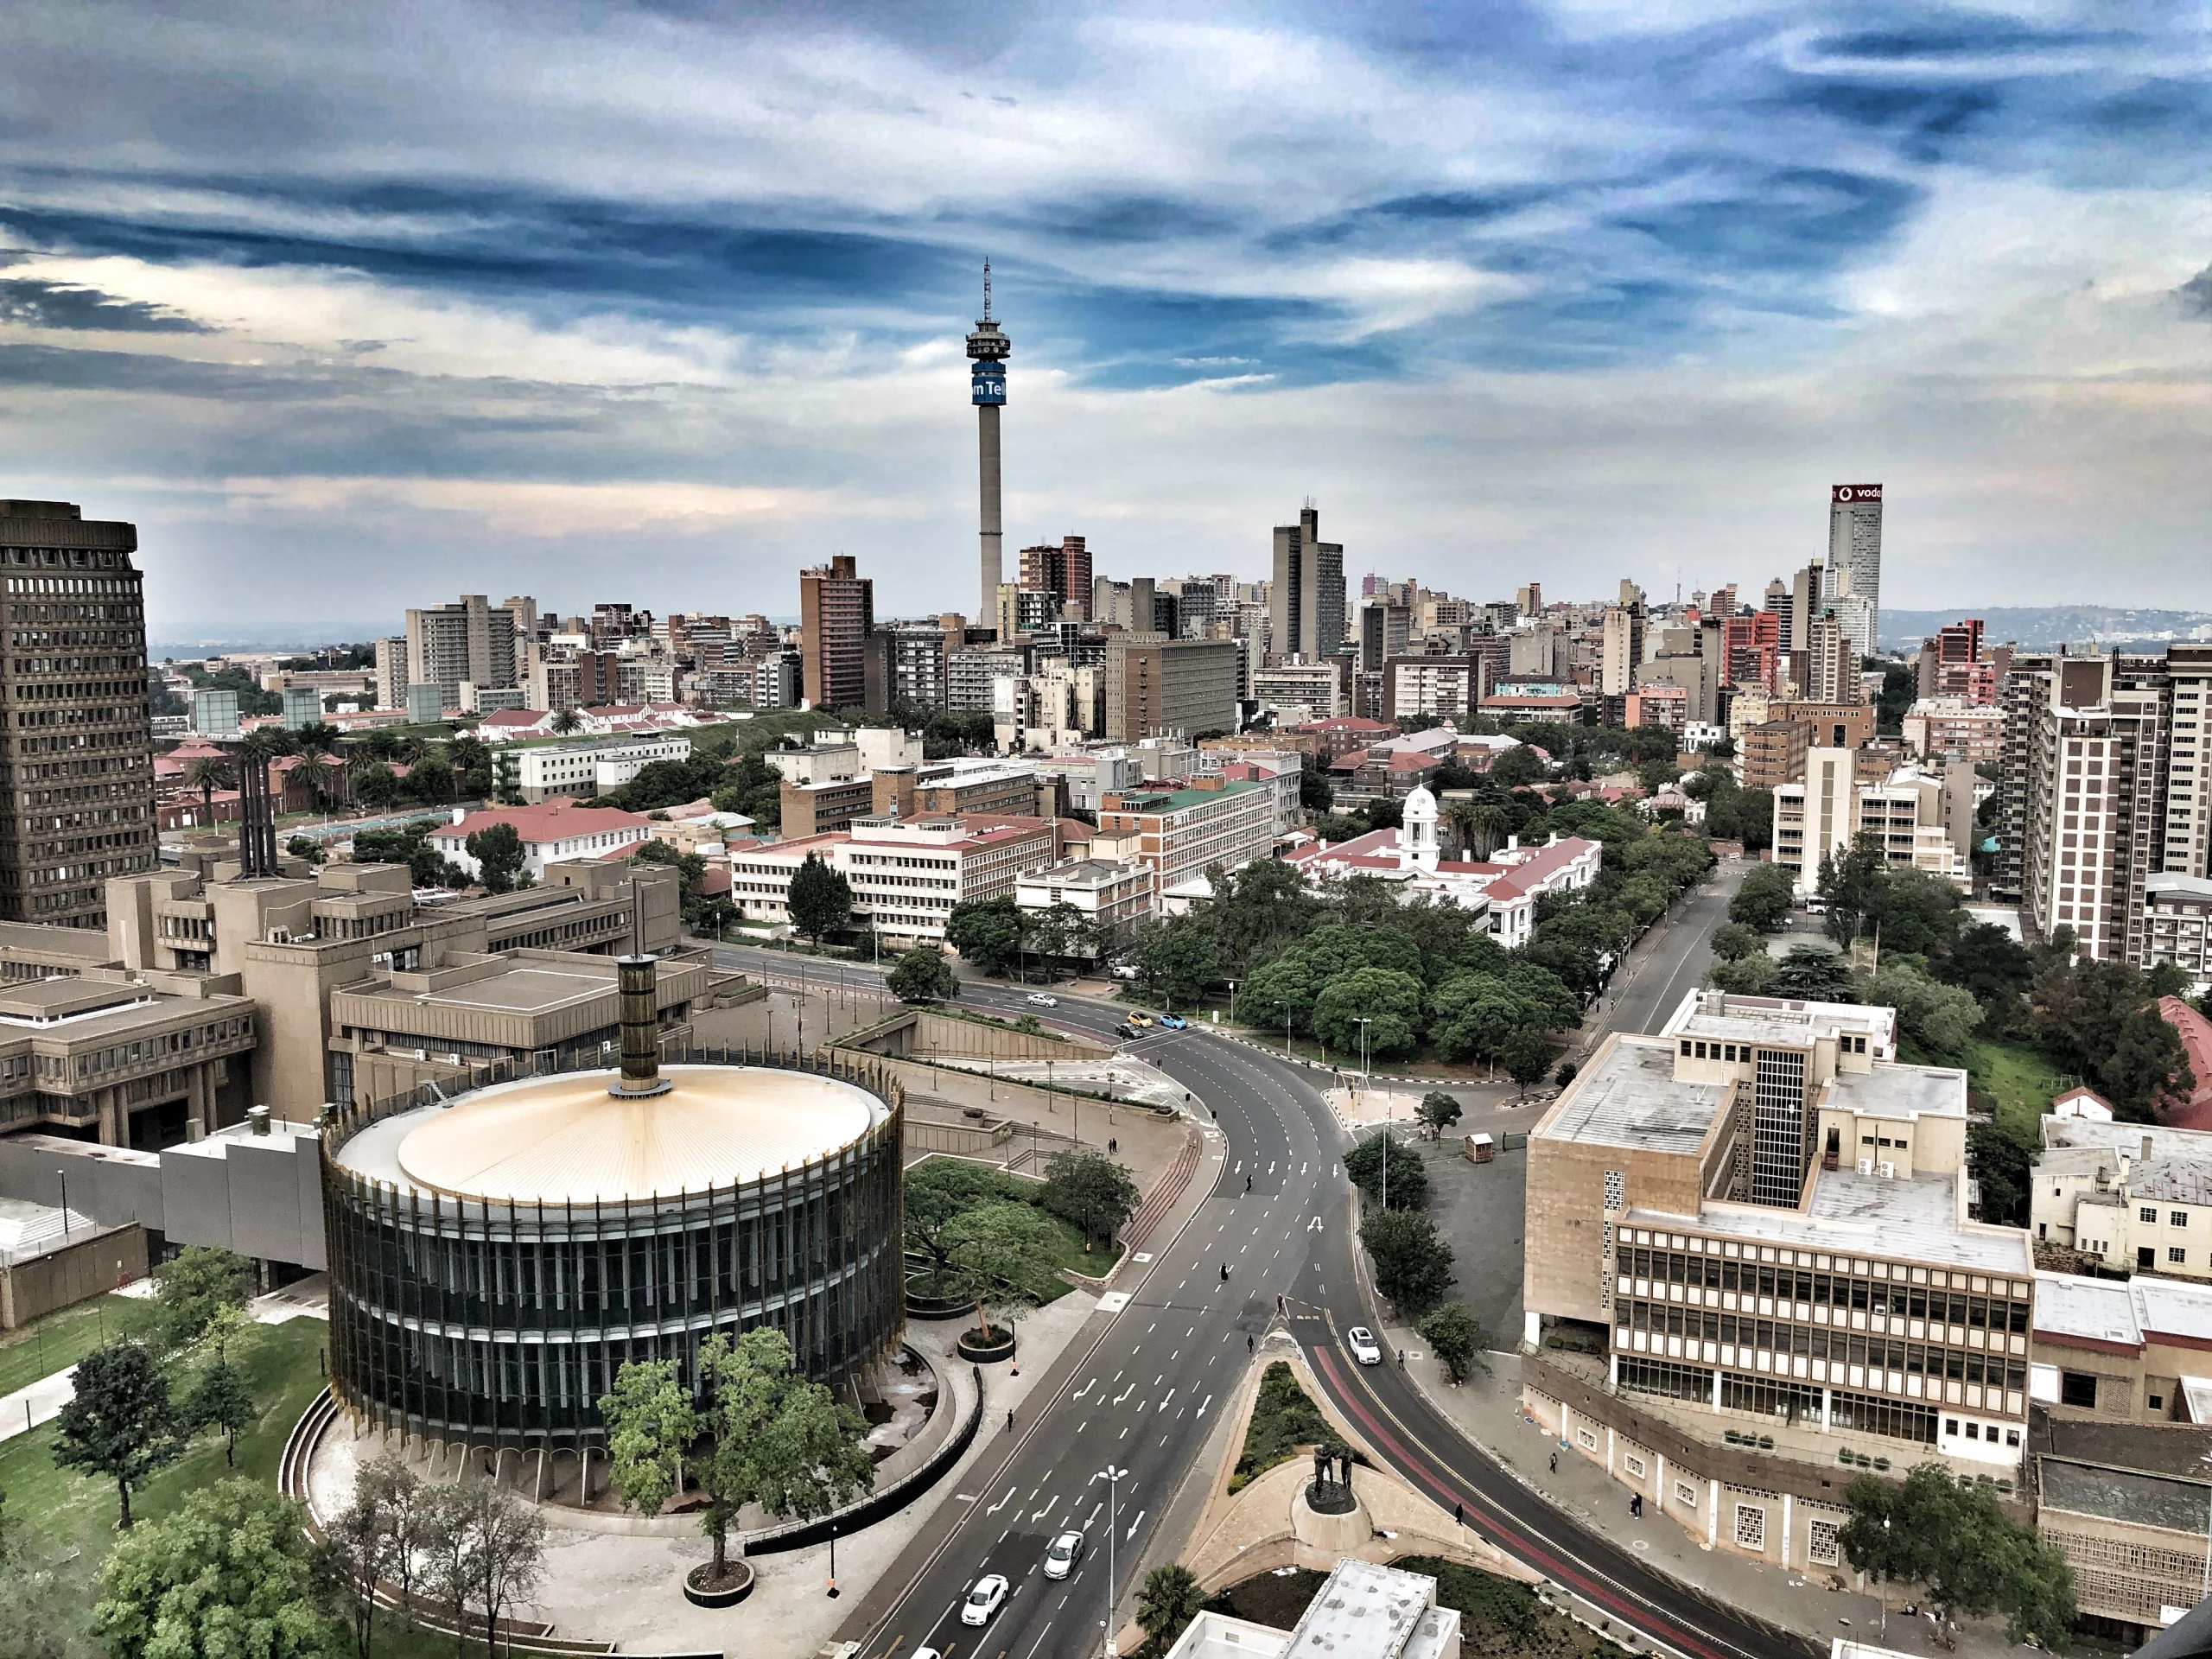 City view of Johannesburg, South Africa